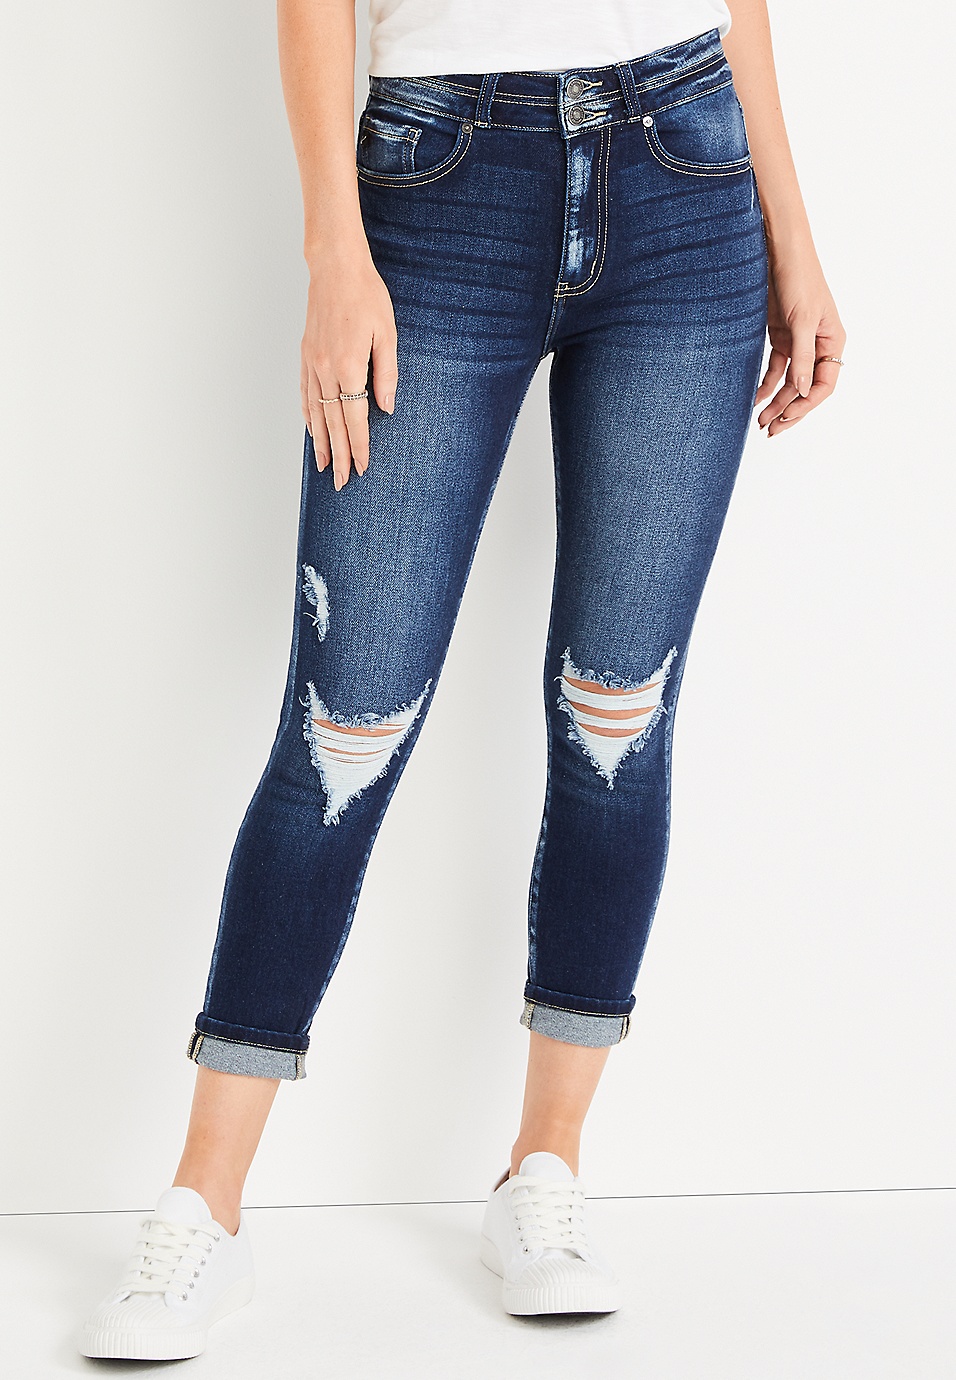 KanCan™ Rise Cropped Jean maurices